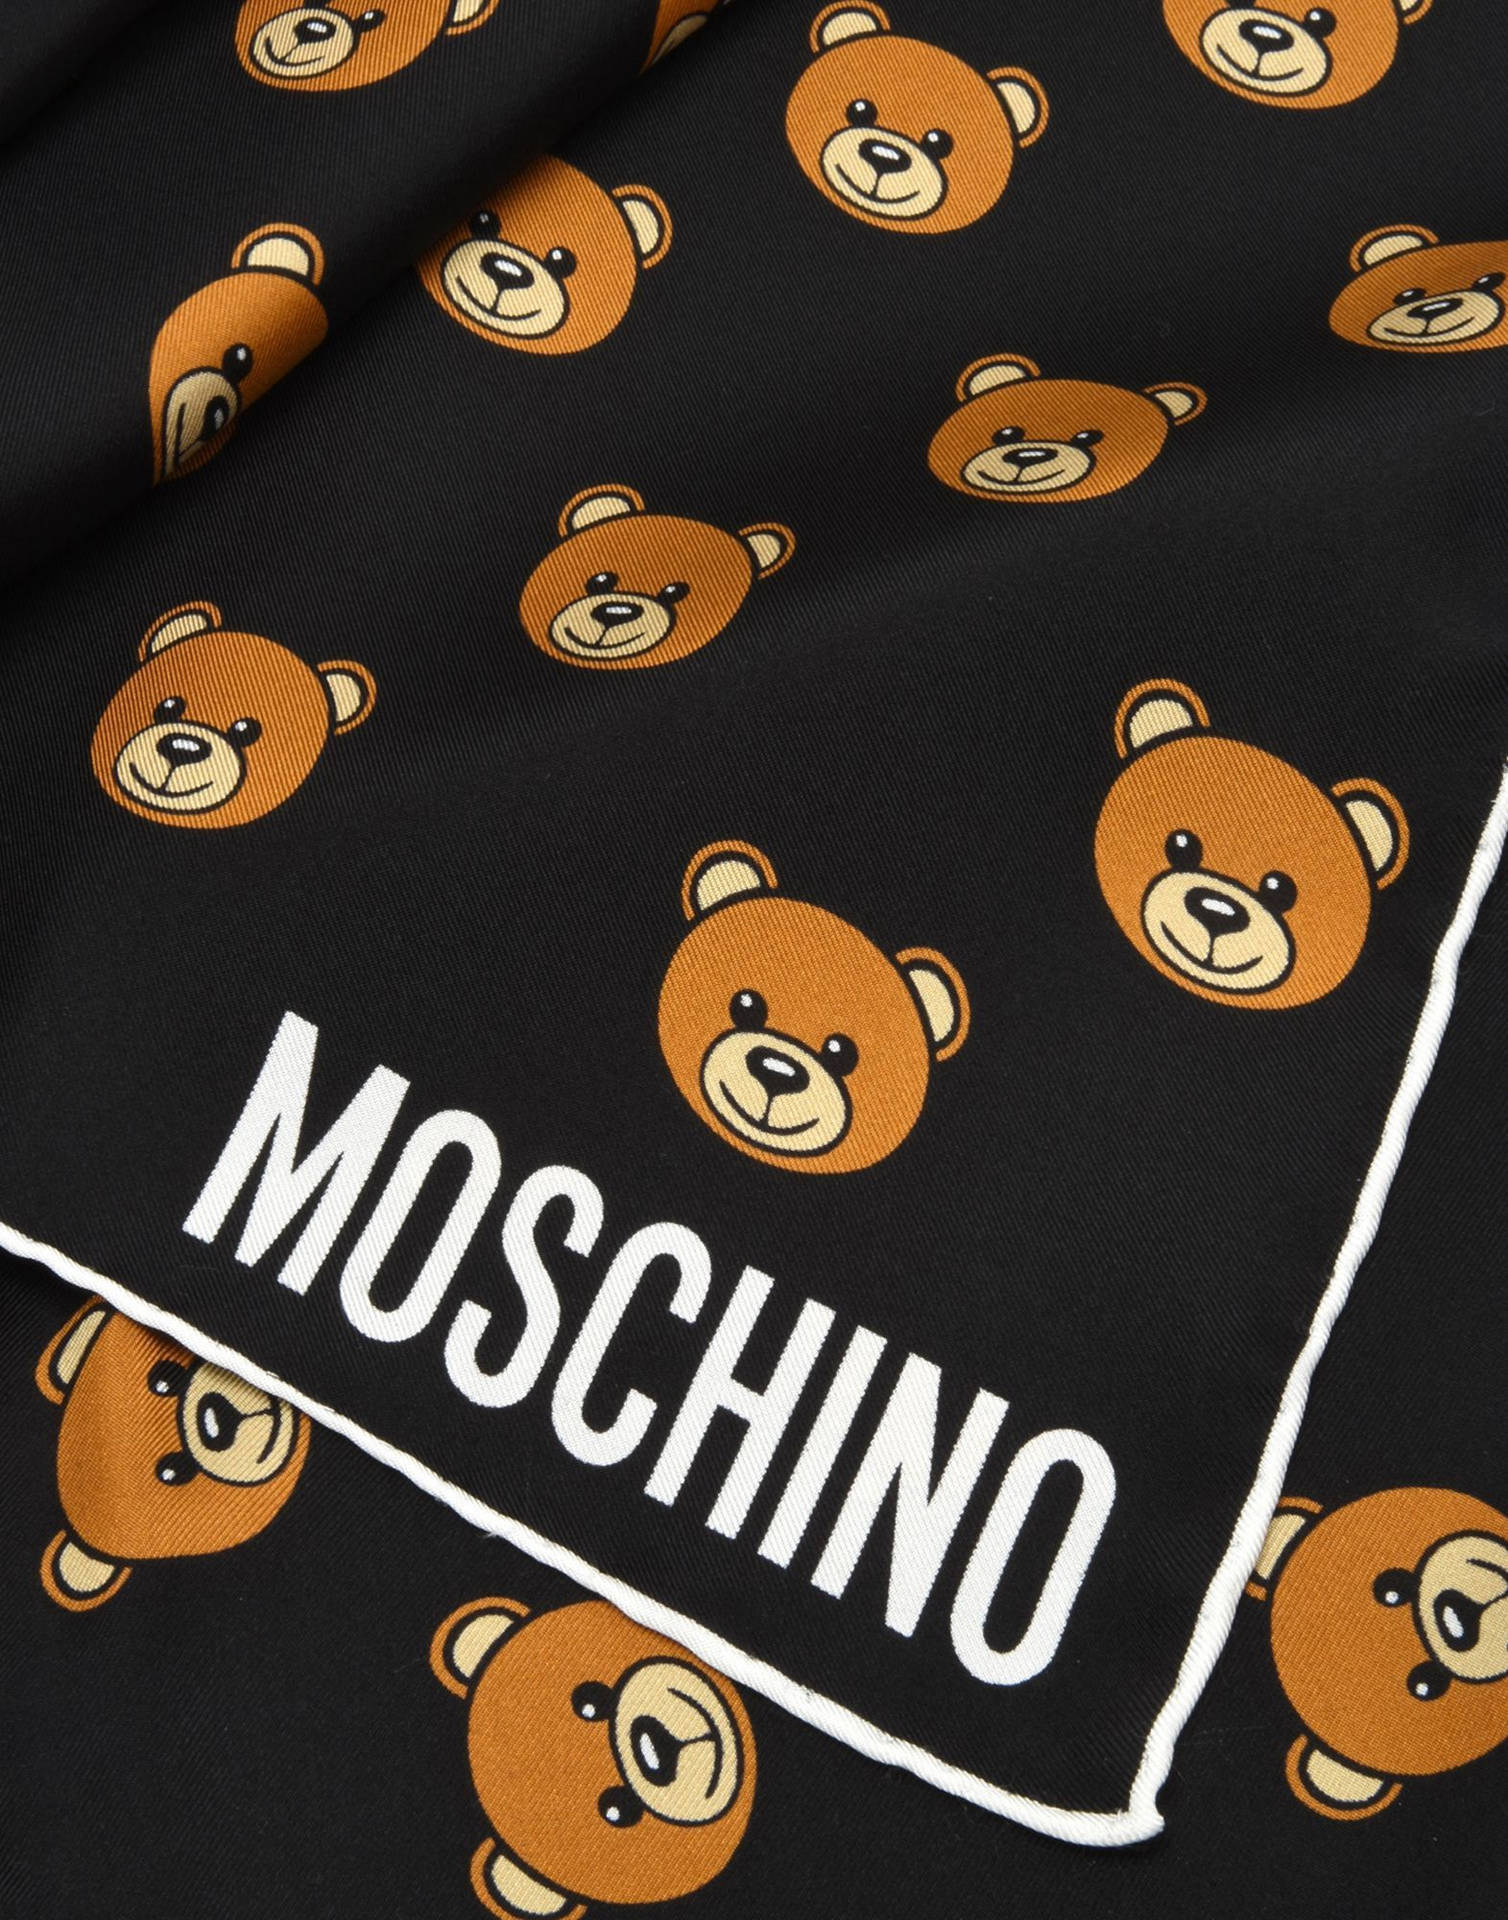 [100+] Moschino Pictures | Wallpapers.com